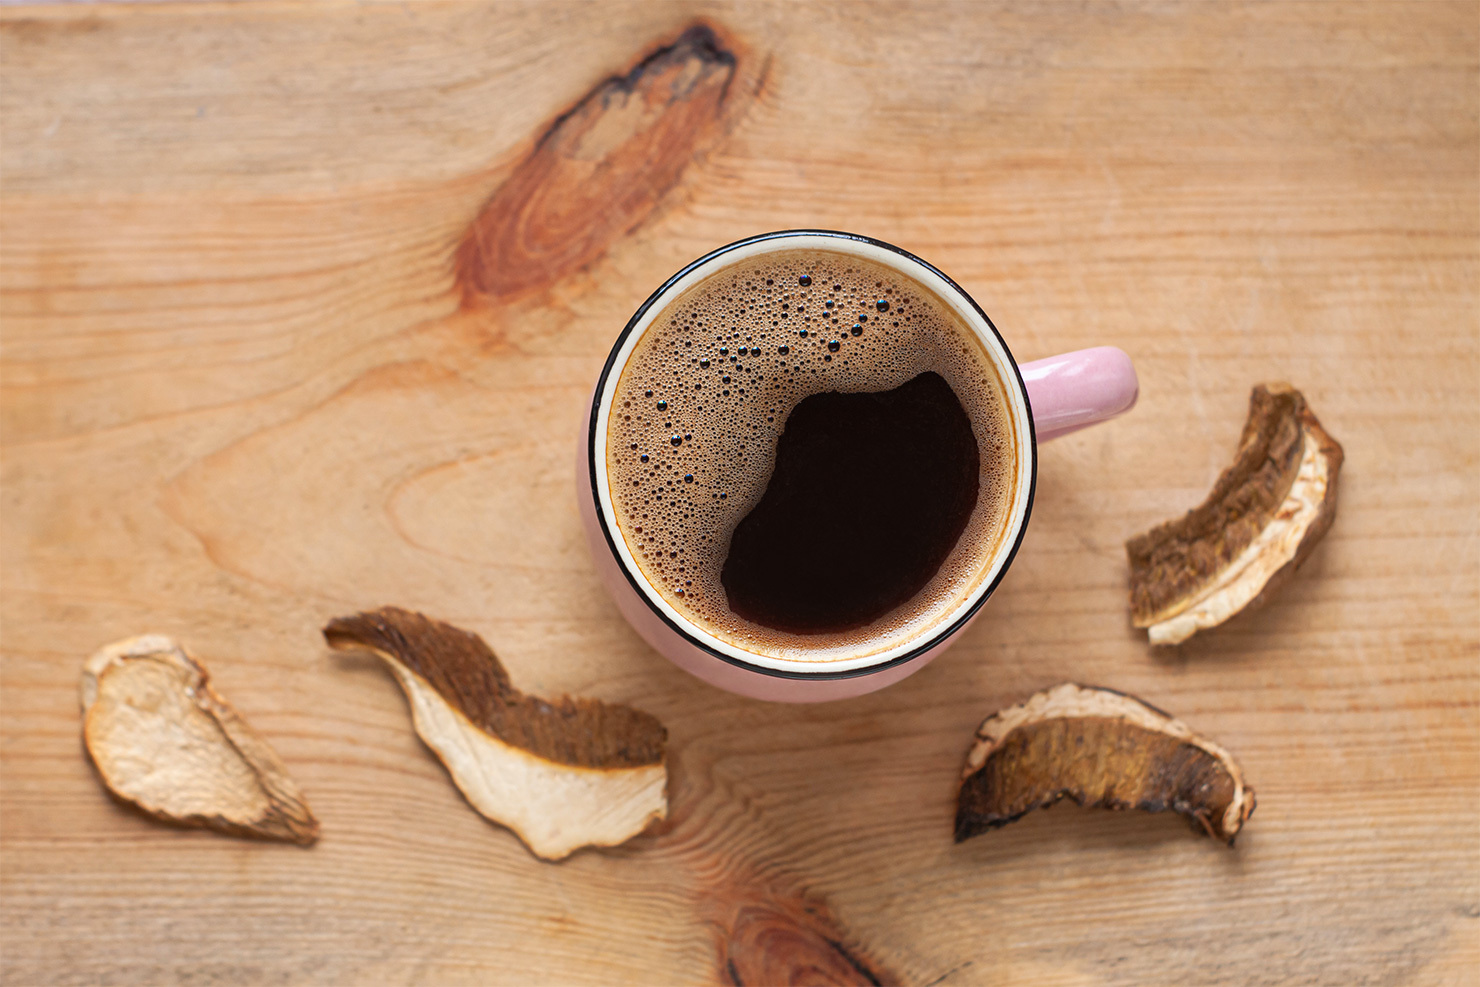 What kind of coffee tastes good, bitter, mellow and refreshing? What are the characteristics of mushroom coffee flavor? Can I have mushrooms and coffee together?